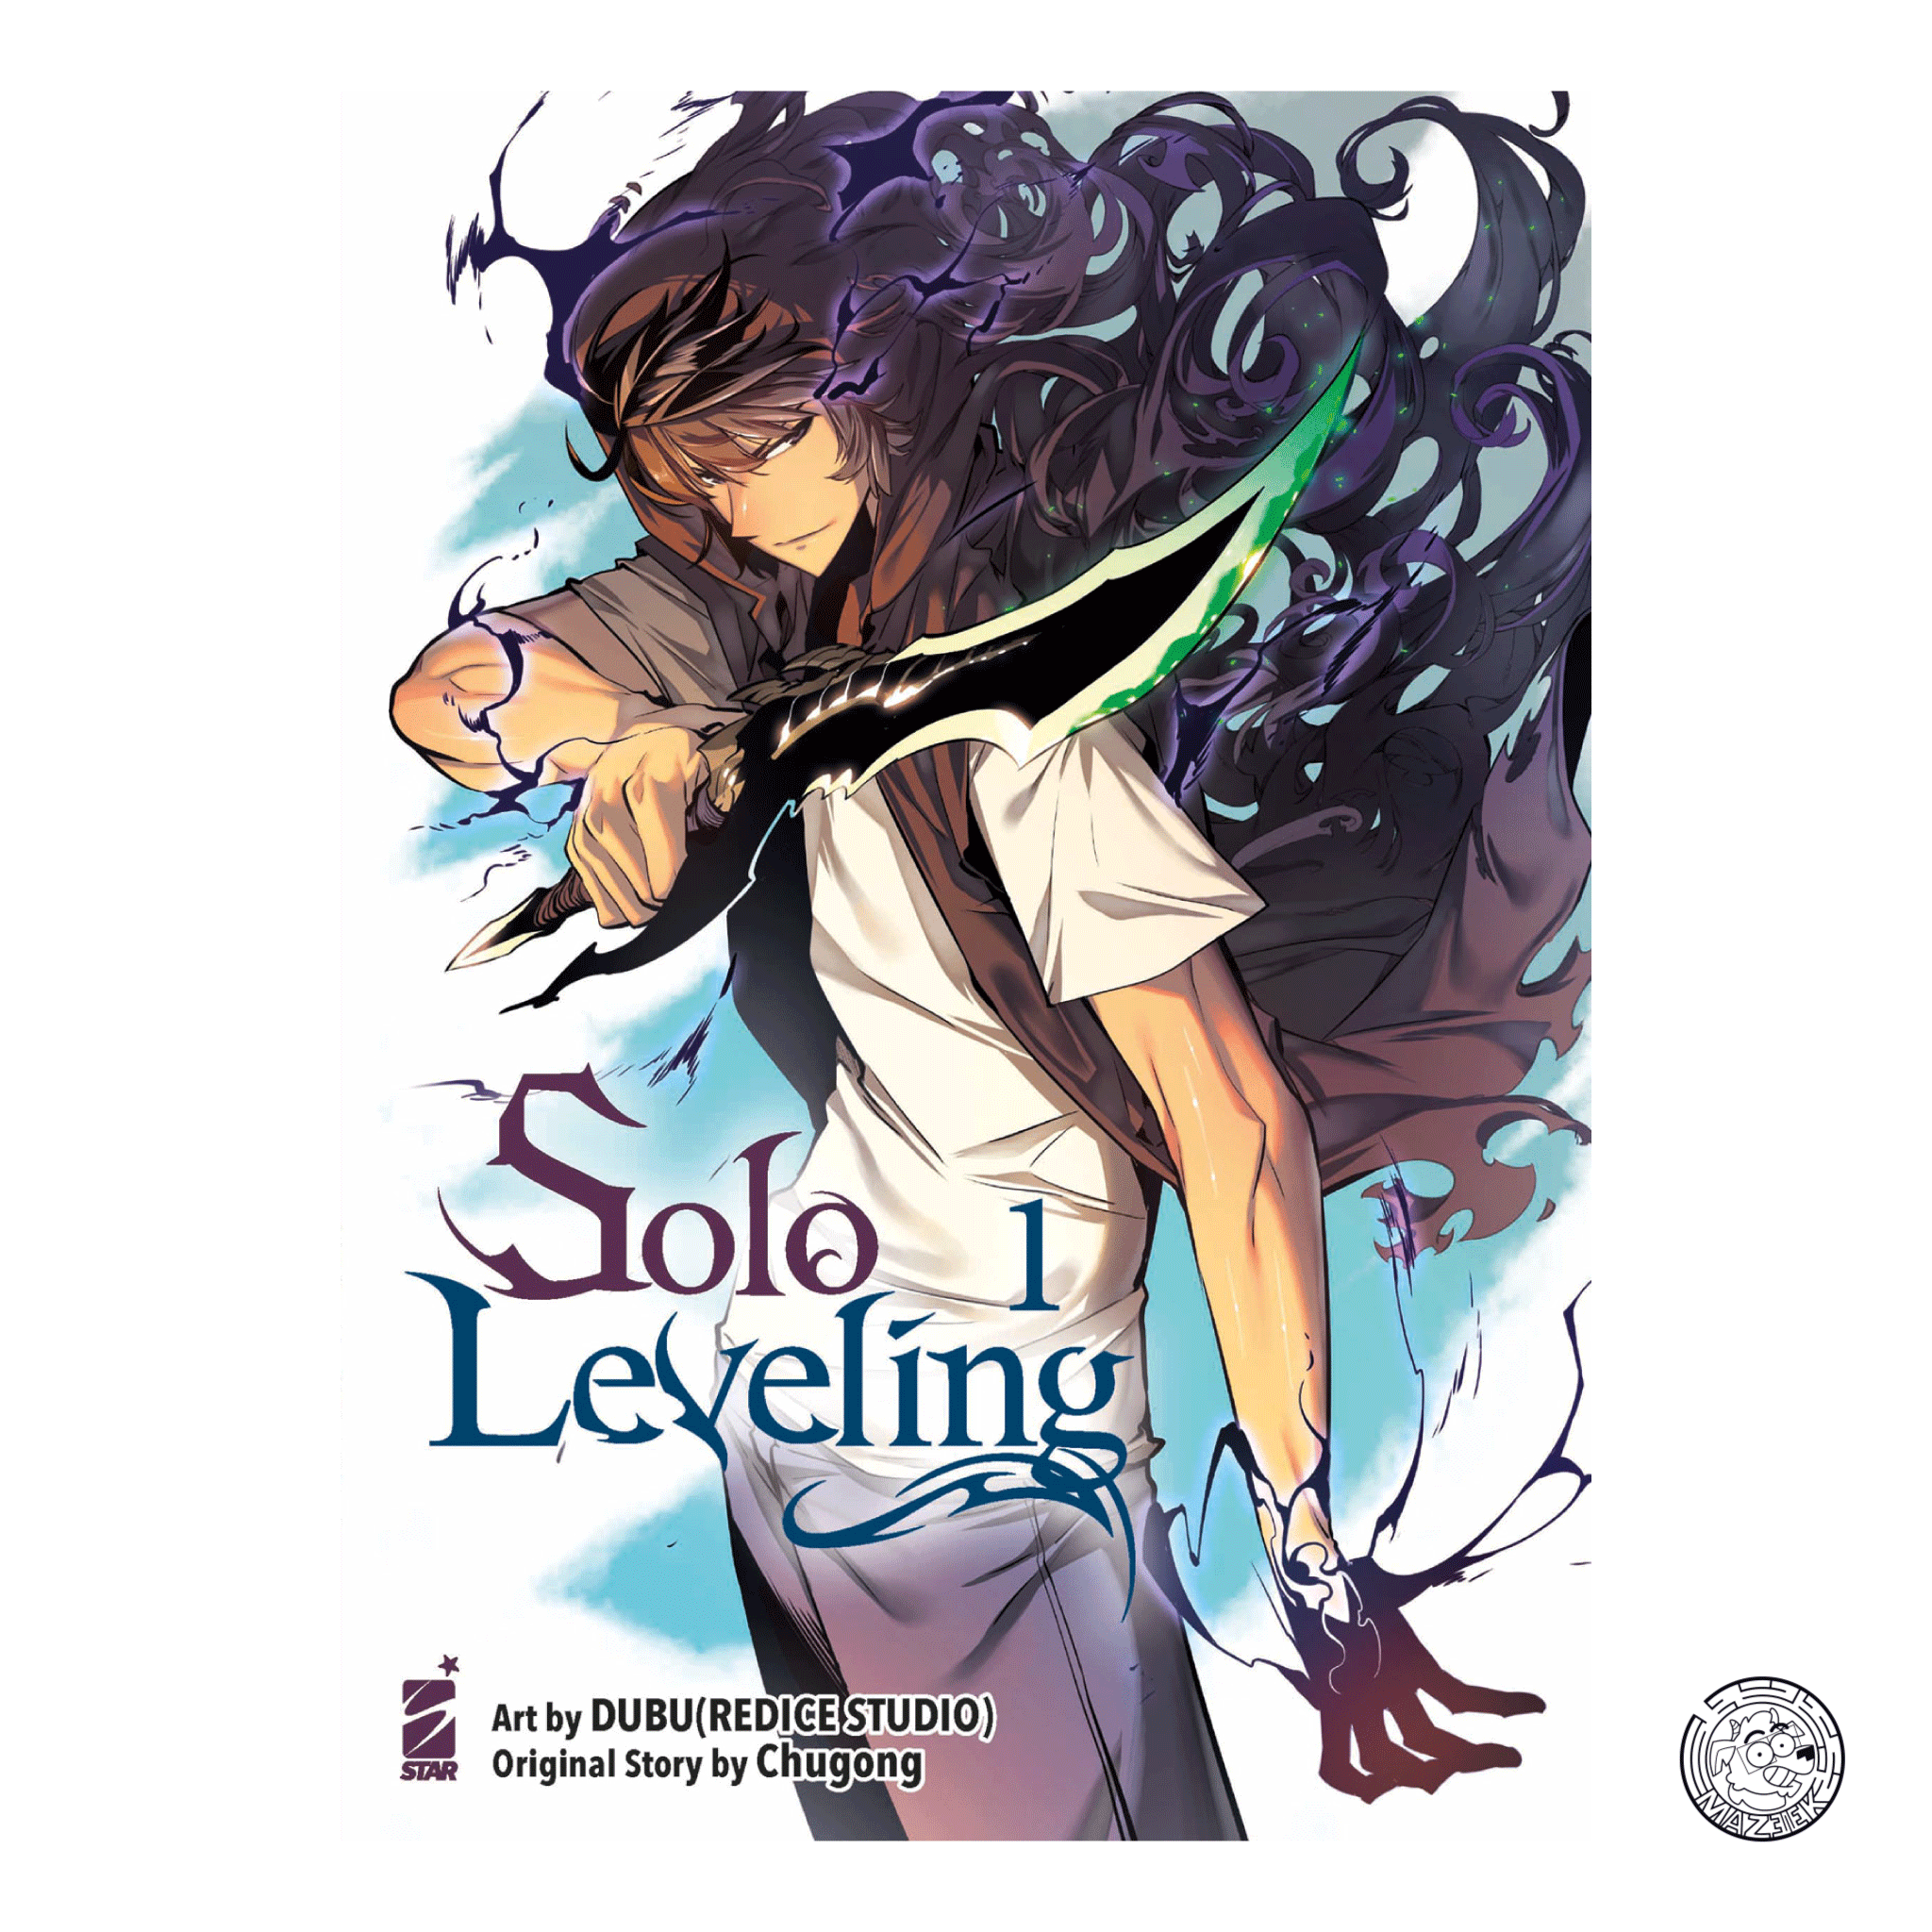 Solo Leveling 01 - Variant Reprint